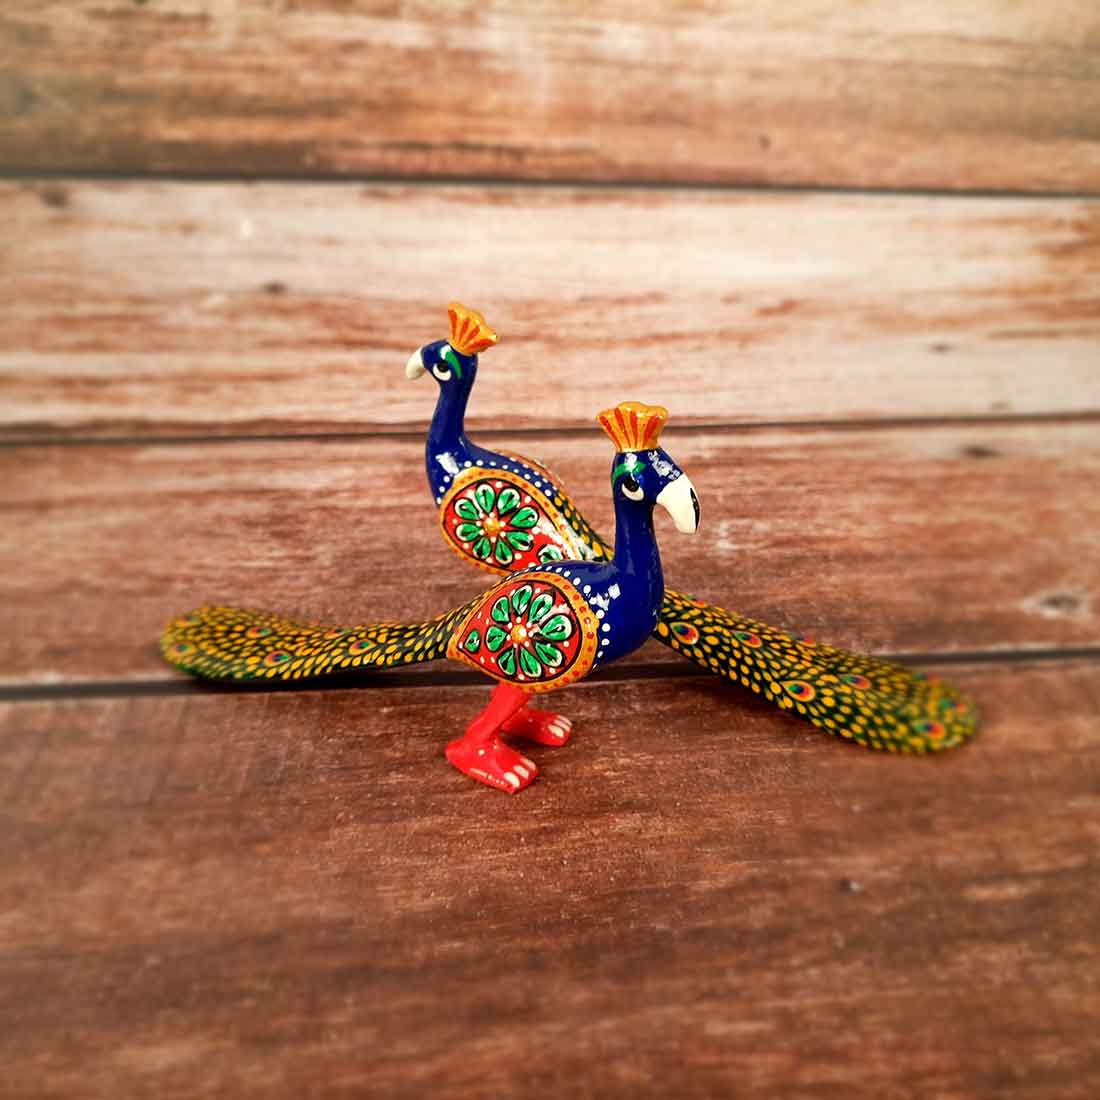 Peacock Figurines For Home Decor & Gifts - 4 Inch -Set of 2 - ApkaMart